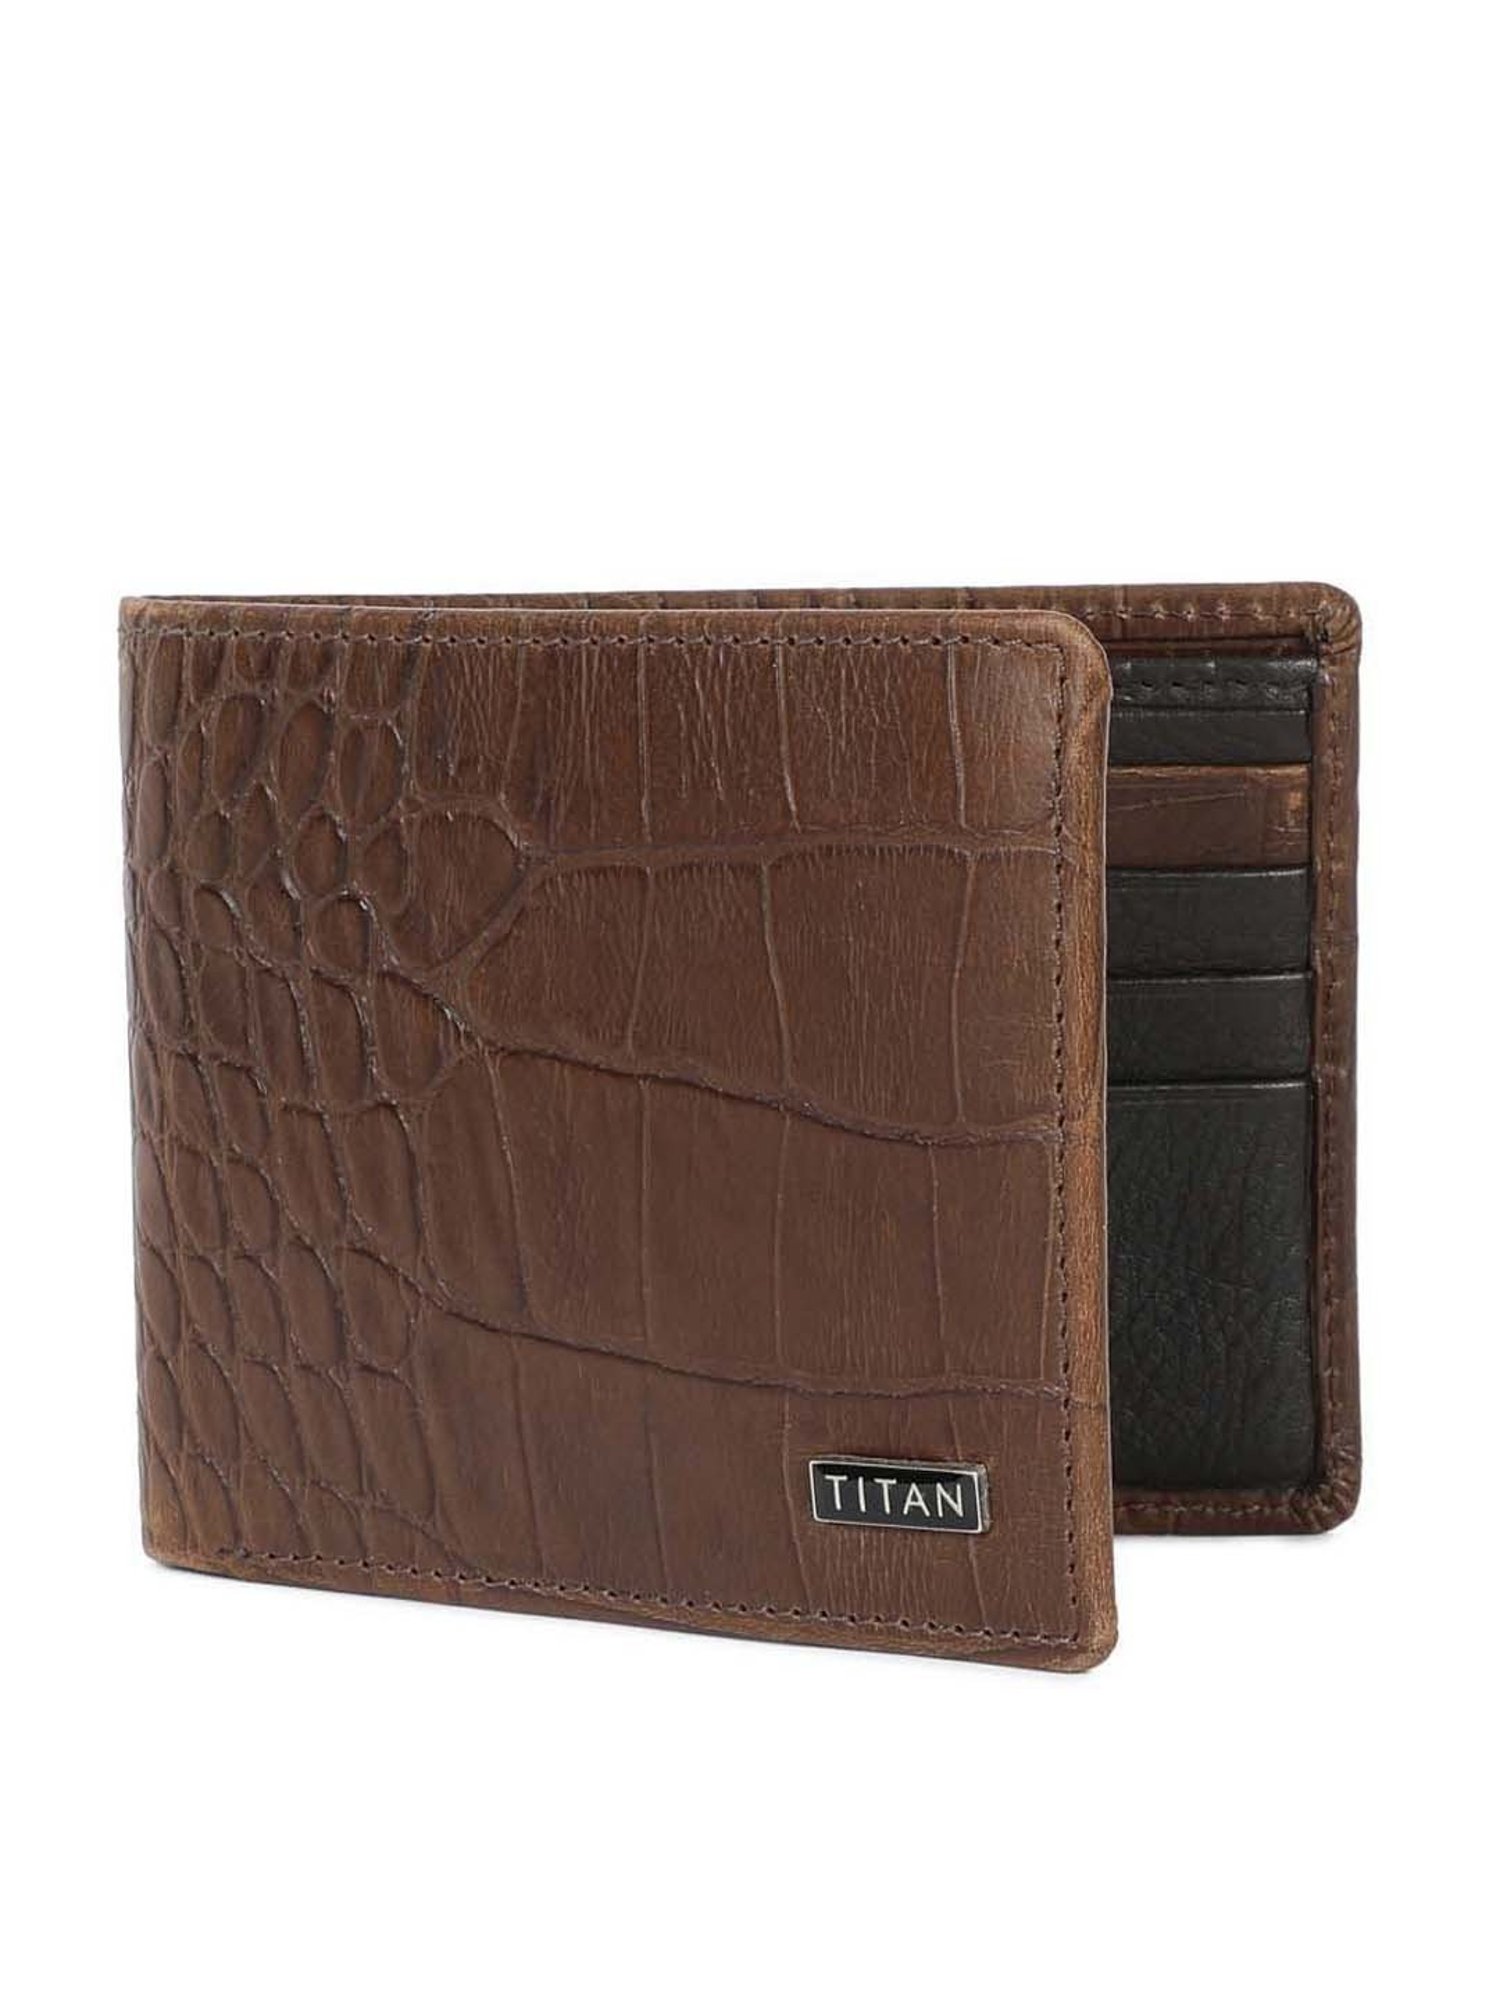 Titan Brown Genuine Leather Wallet TW107LM1DB, Size: 9.5 Cm at Rs 1399 in  Hosur